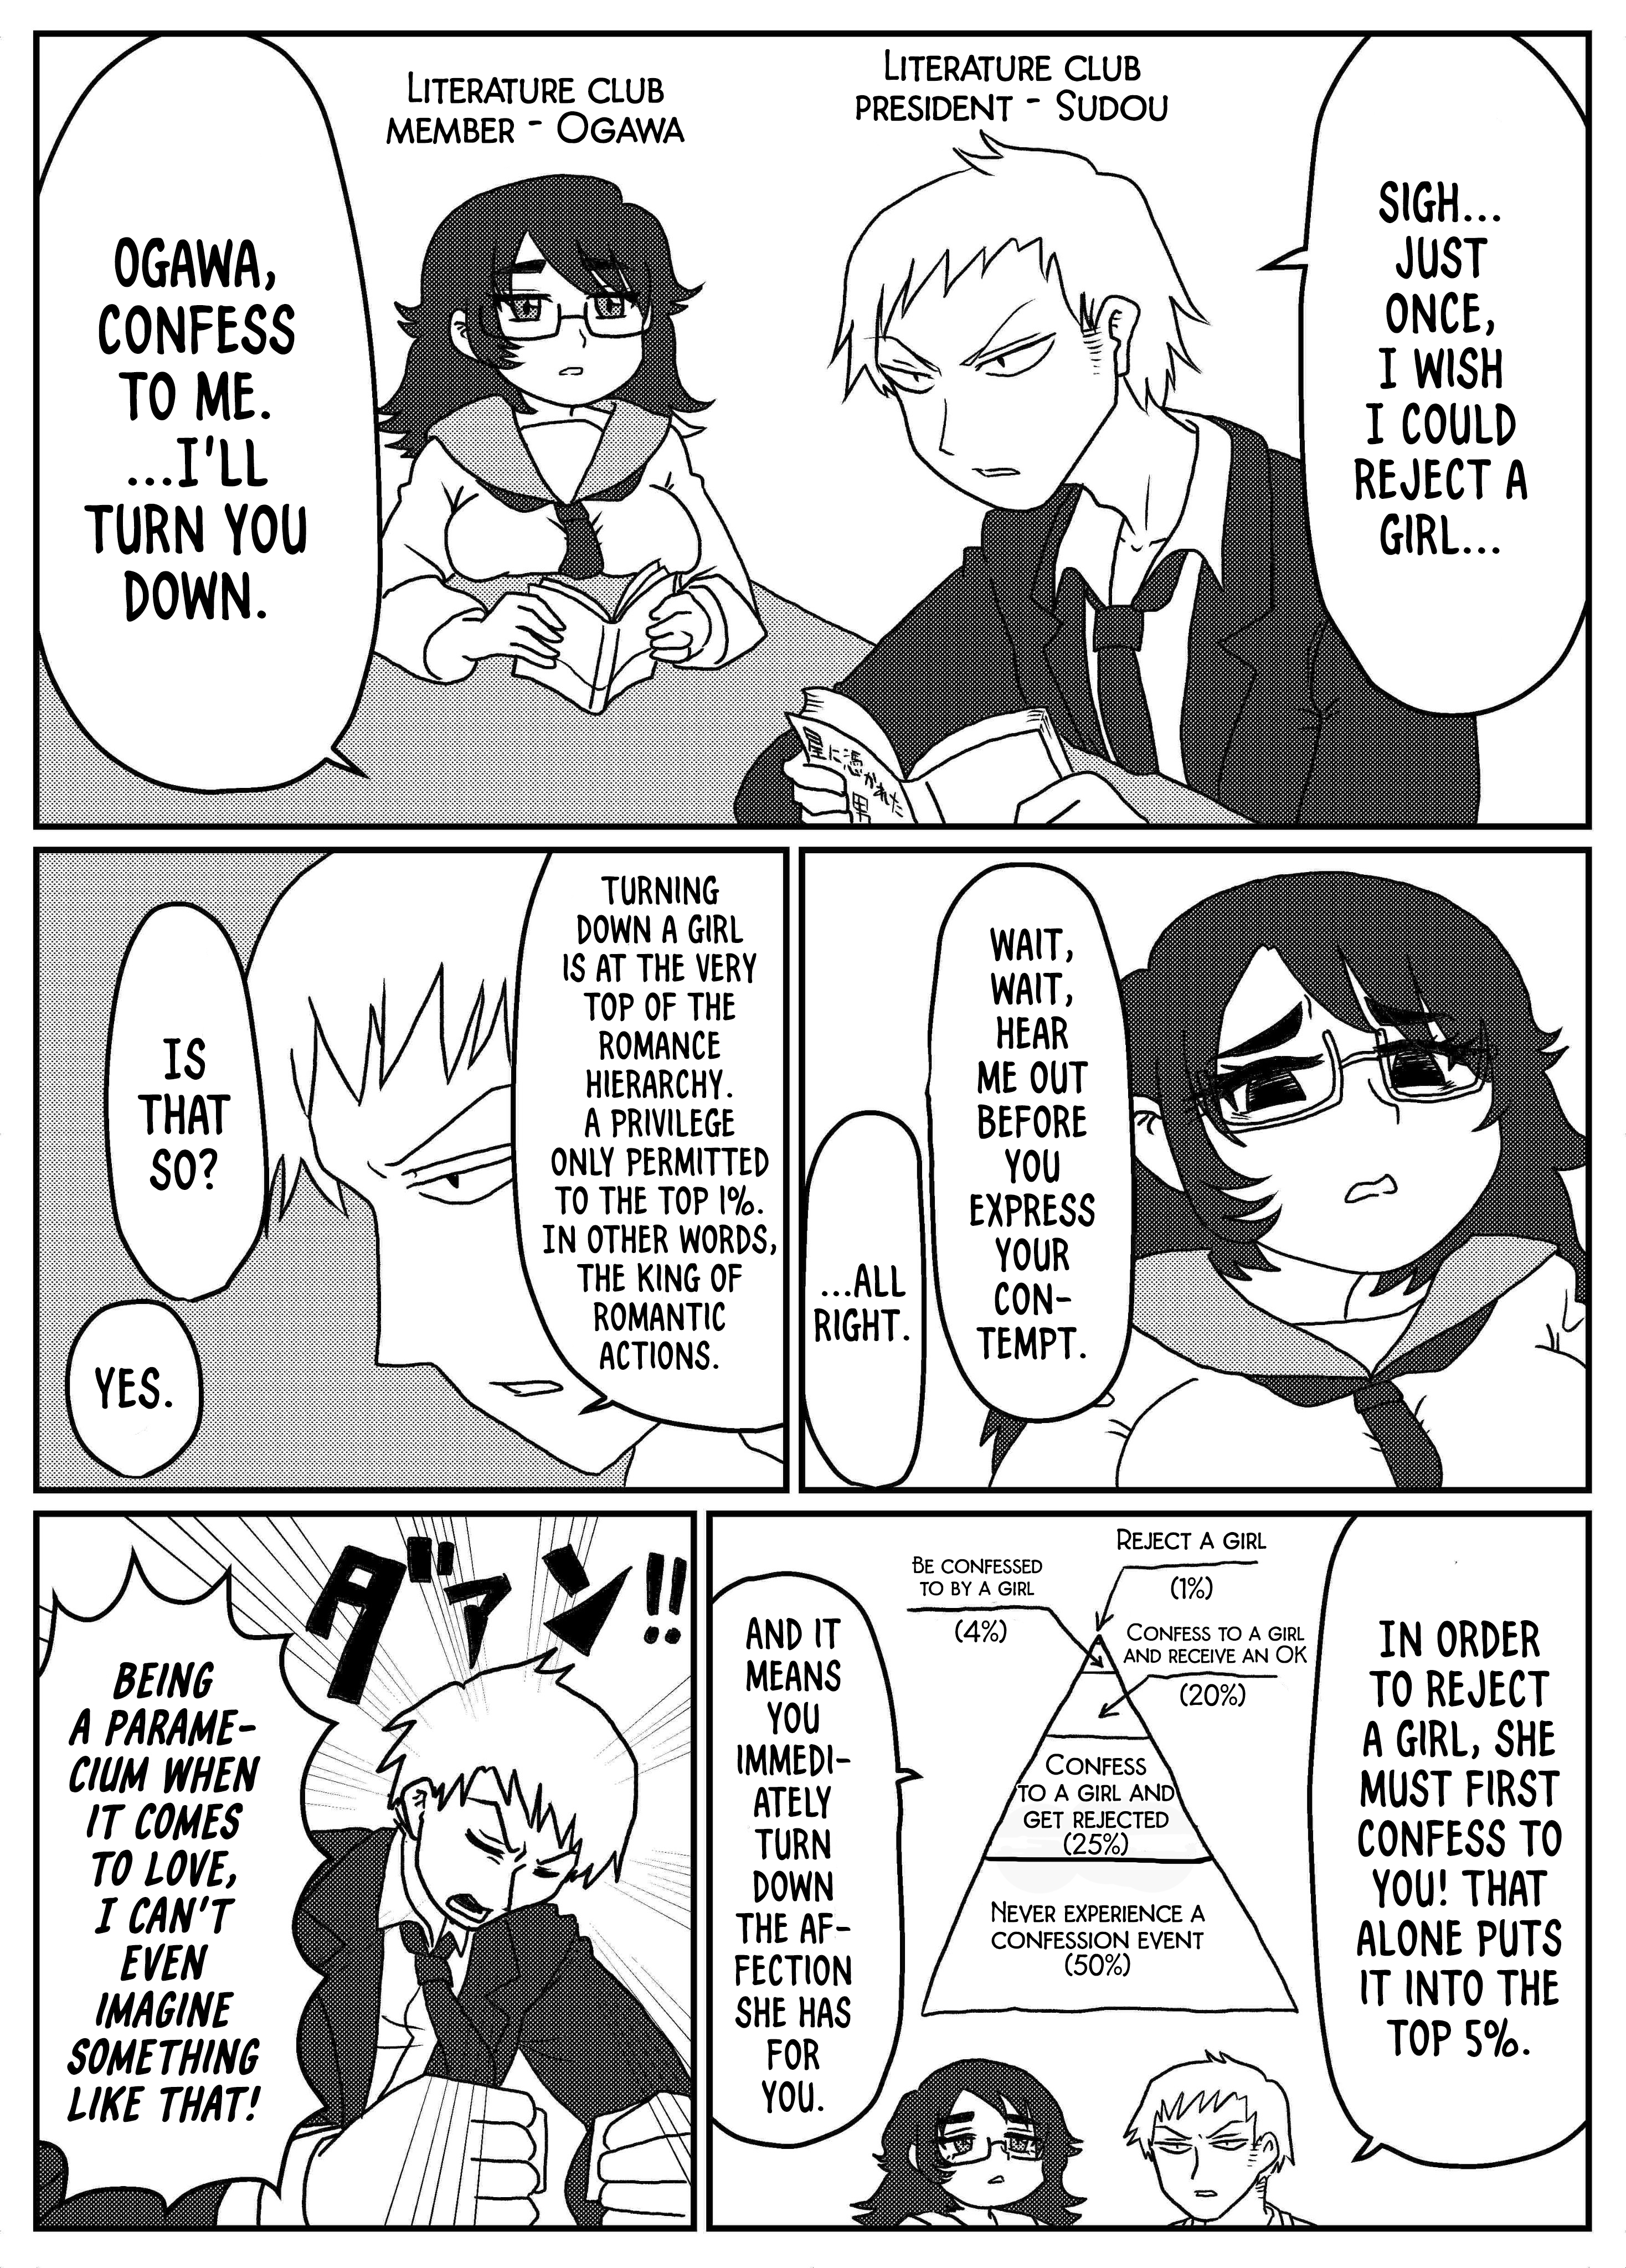 A story about a senpai who wants to reject a girl at least once. manga